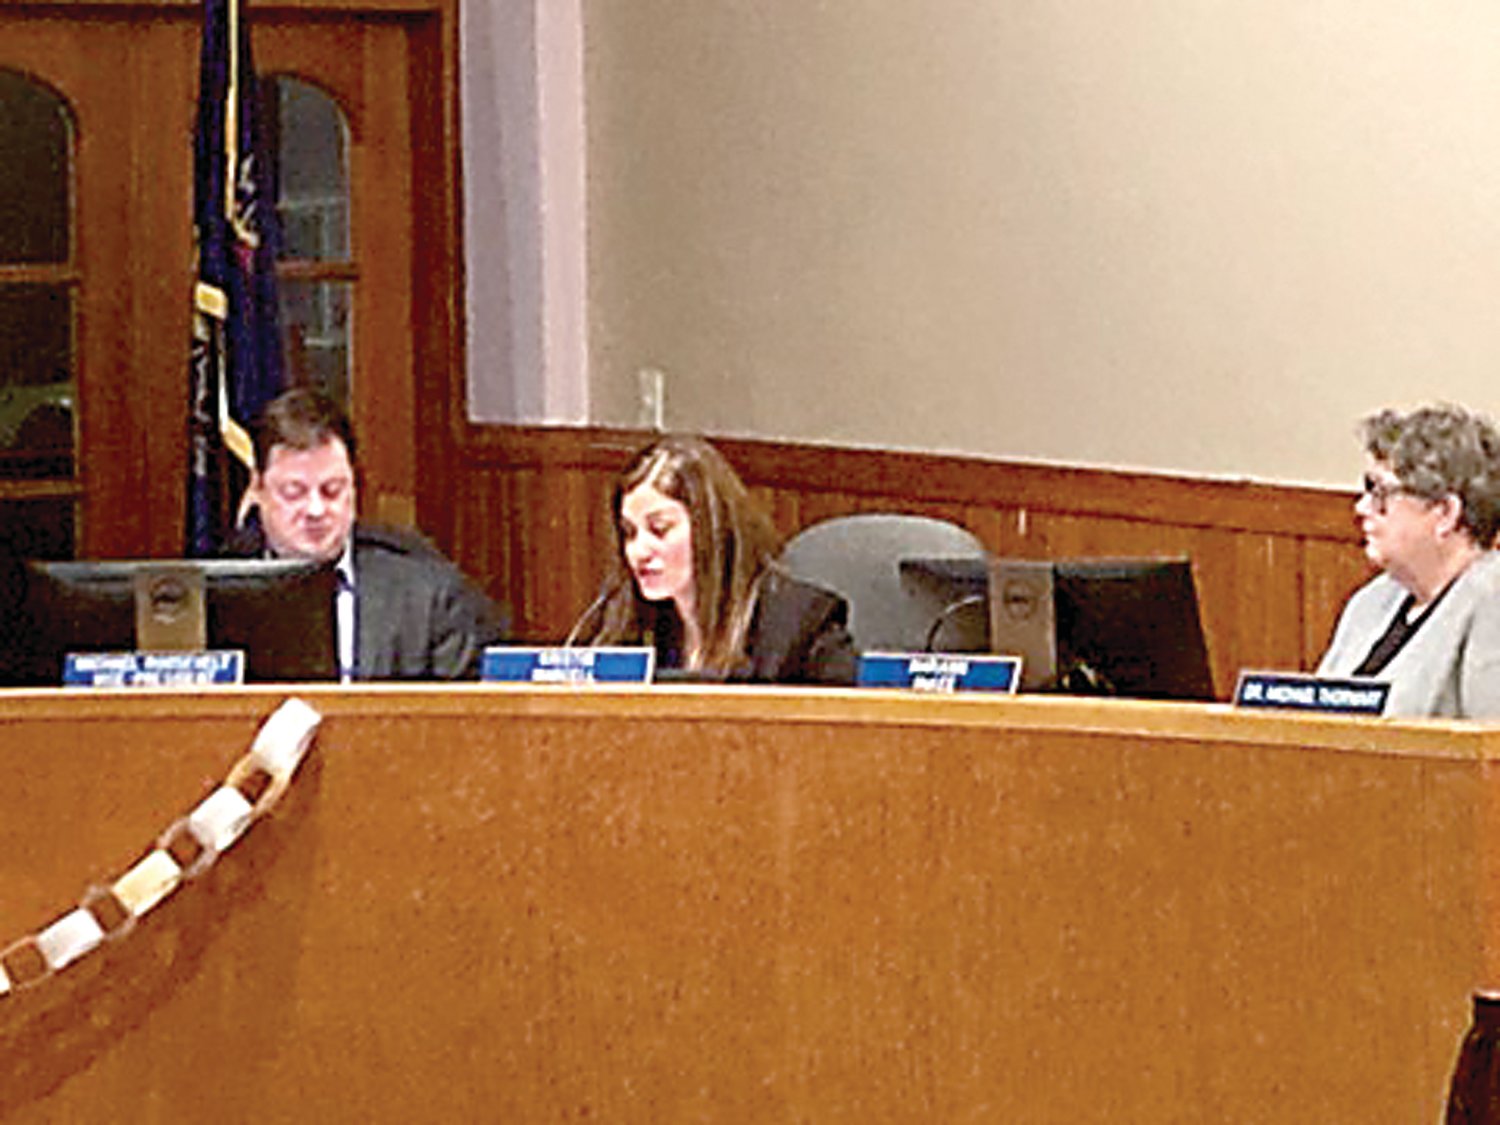 Kristin Marcell, center, delivers her farewell remarks to the Council Rock School Board on Feb. 9 as Mike Roosevelt, left, and Mariann McKee look on. Marcell  is now the state representative for the 178th District in Bucks County.